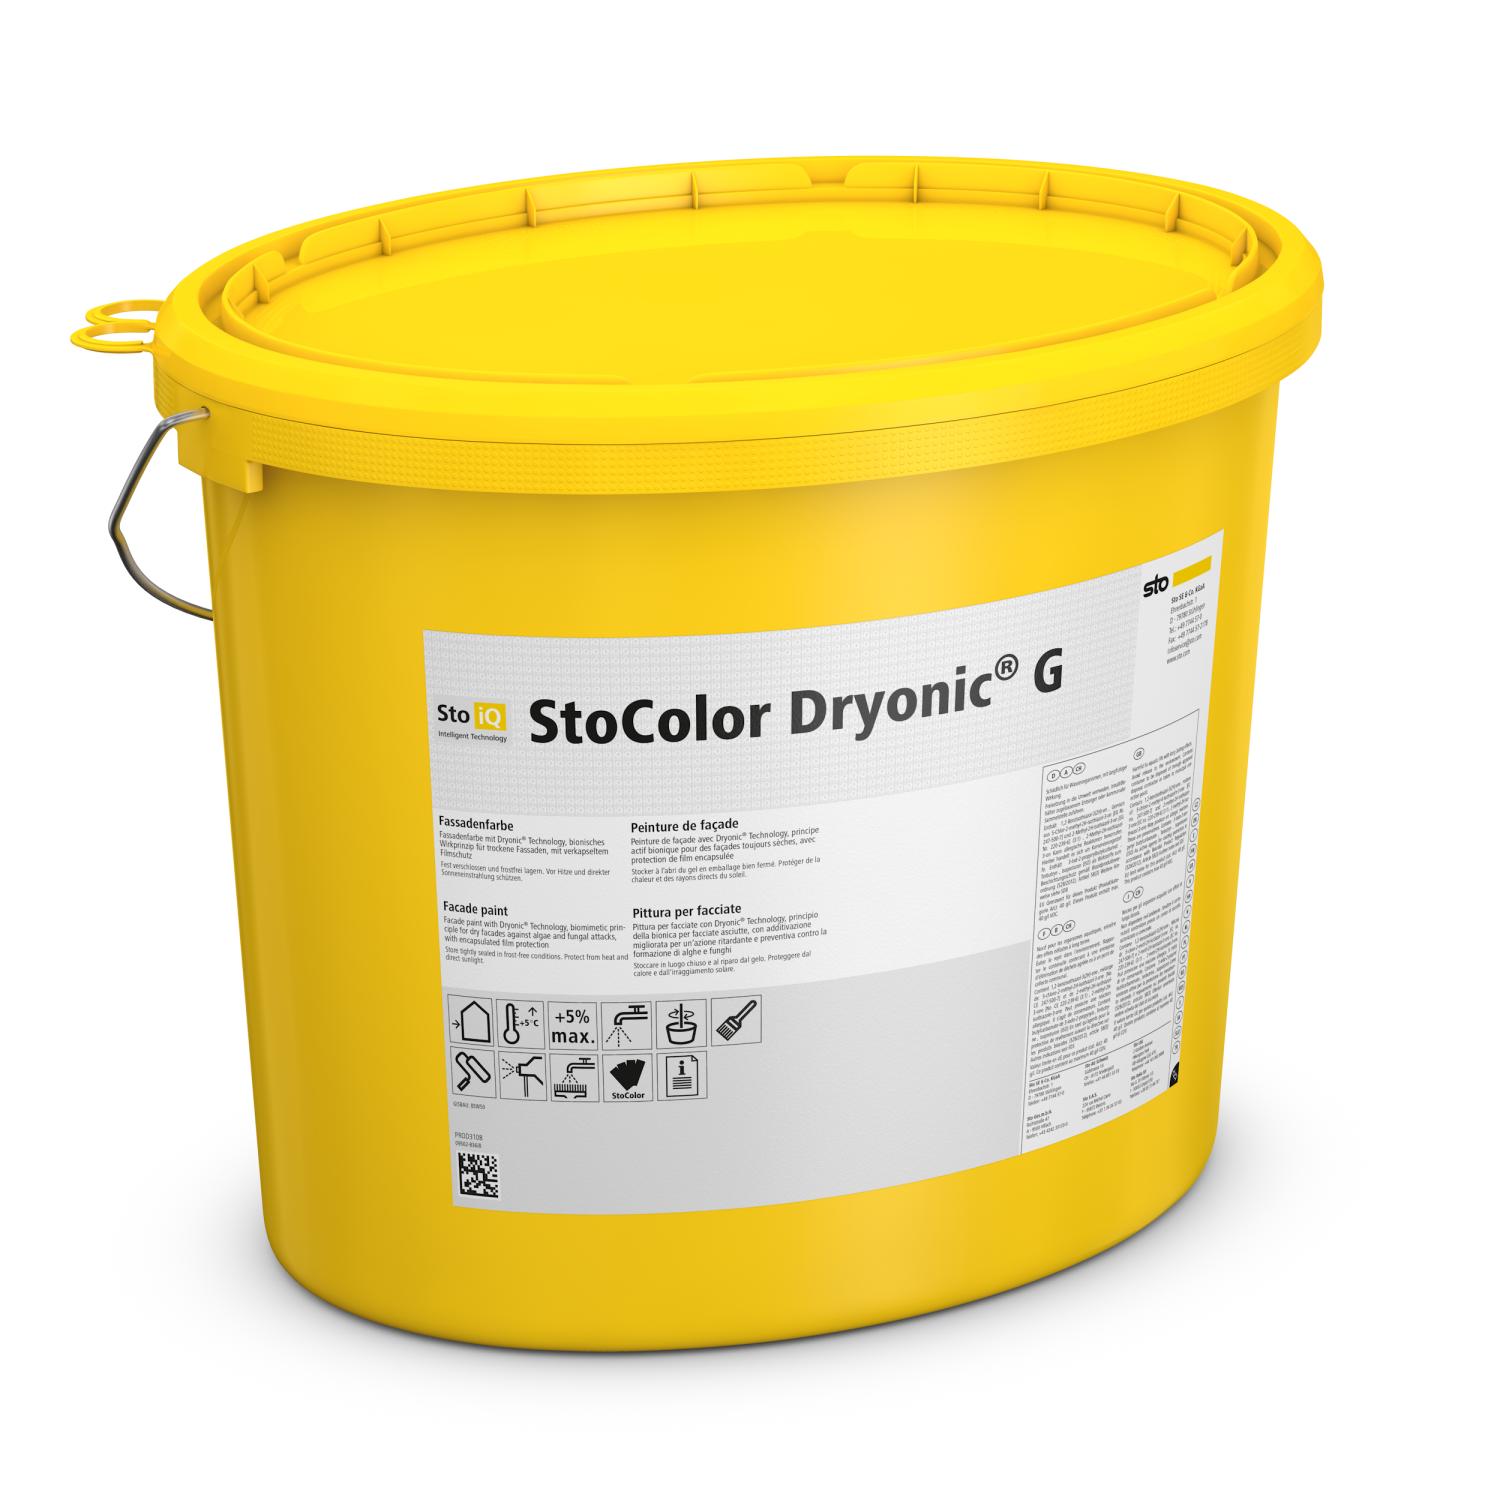 StoColor Dryonic G weiß - 5 l Eimer